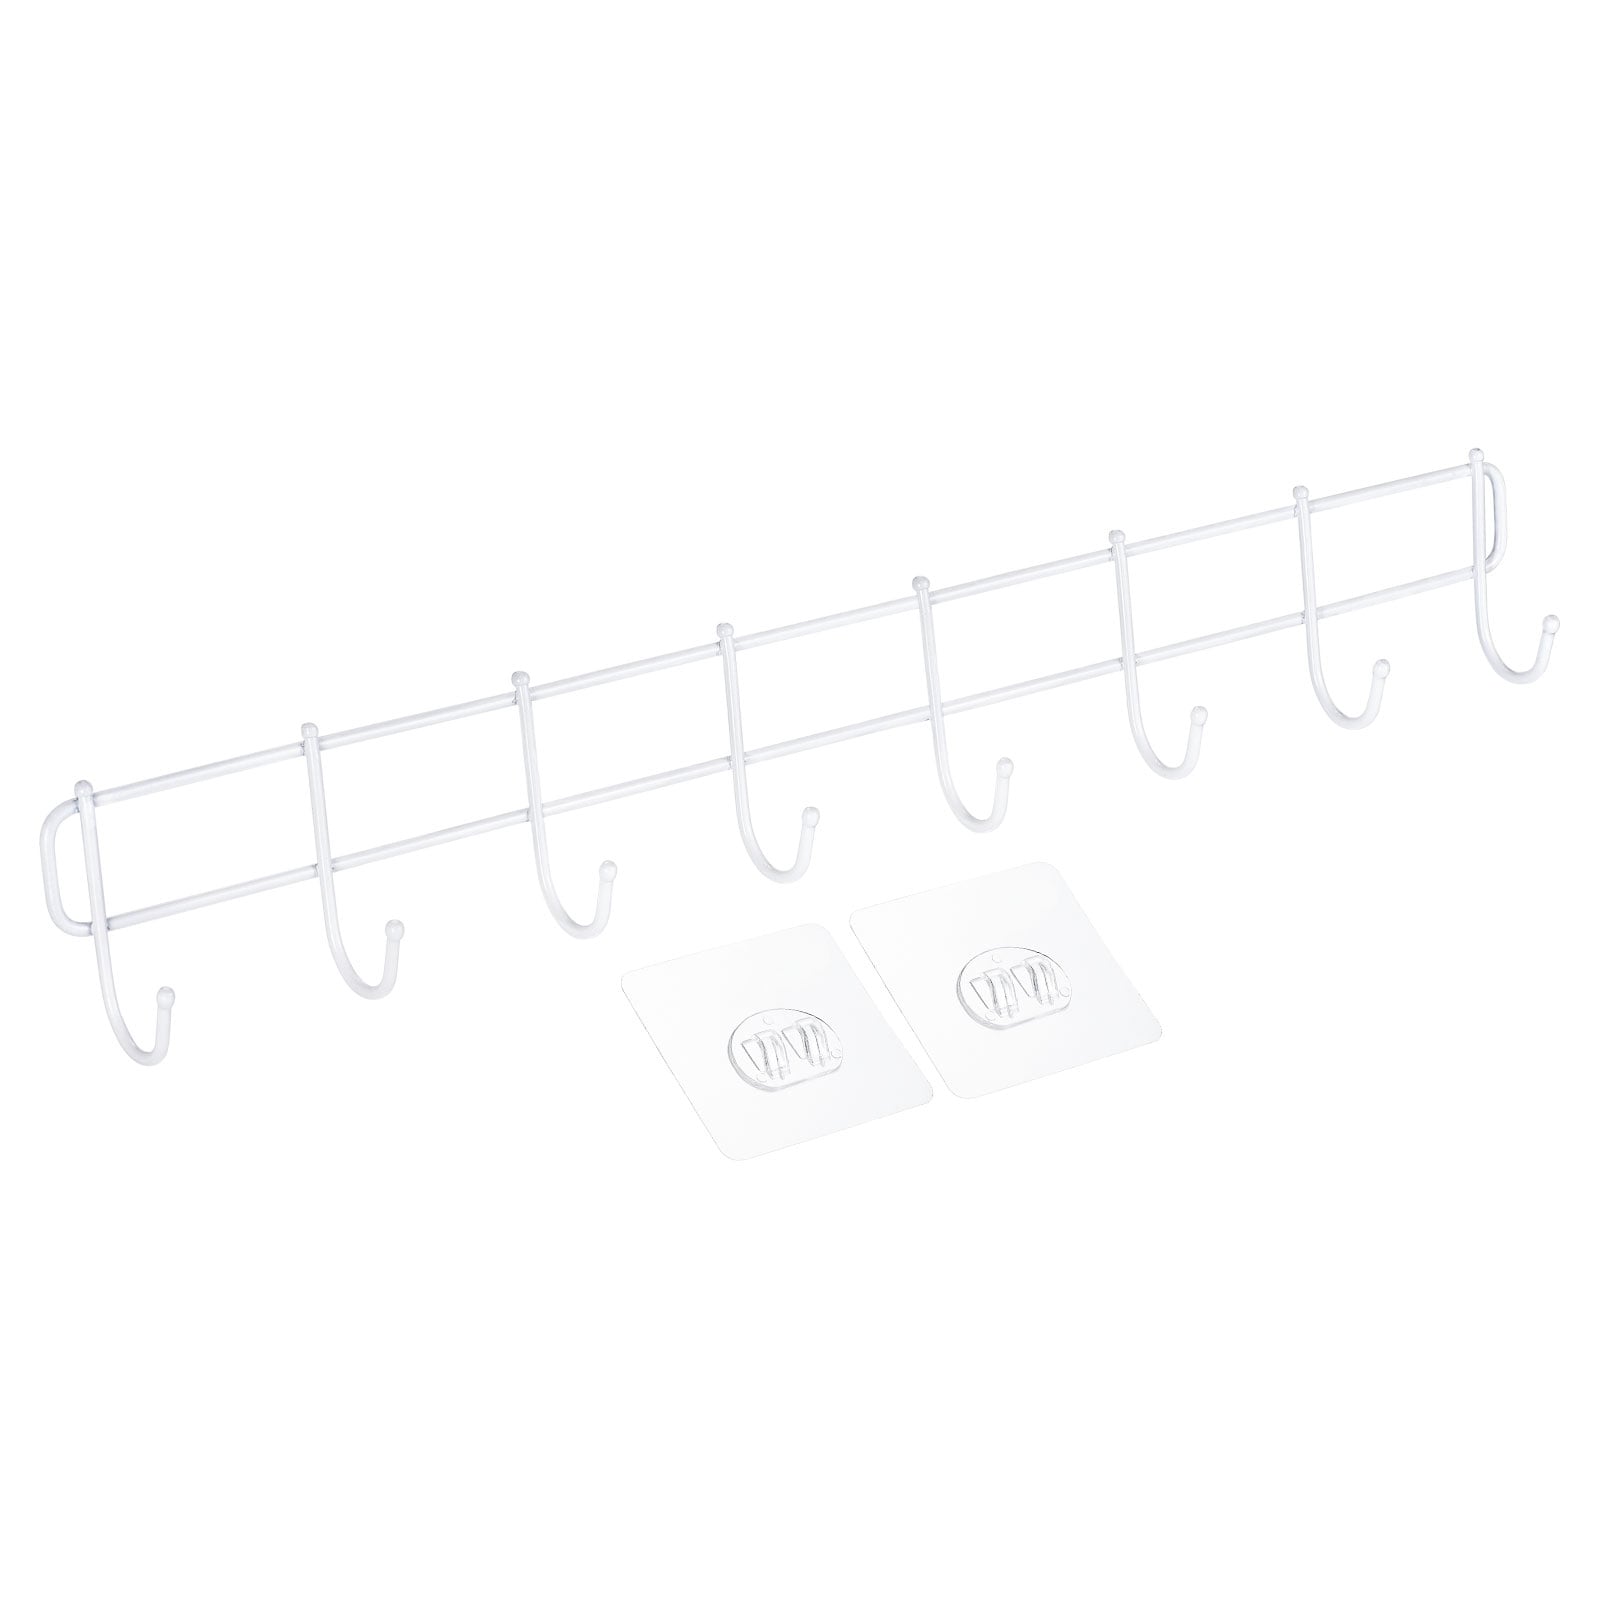 https://ak1.ostkcdn.com/images/products/is/images/direct/6bff99b89a815f544d3bbef511e63f7cbe039e30/Wall-Hooks-Rack-No-Drilling-Wall-Mounted-with-8-Hooks-Stickers-Hanger.jpg